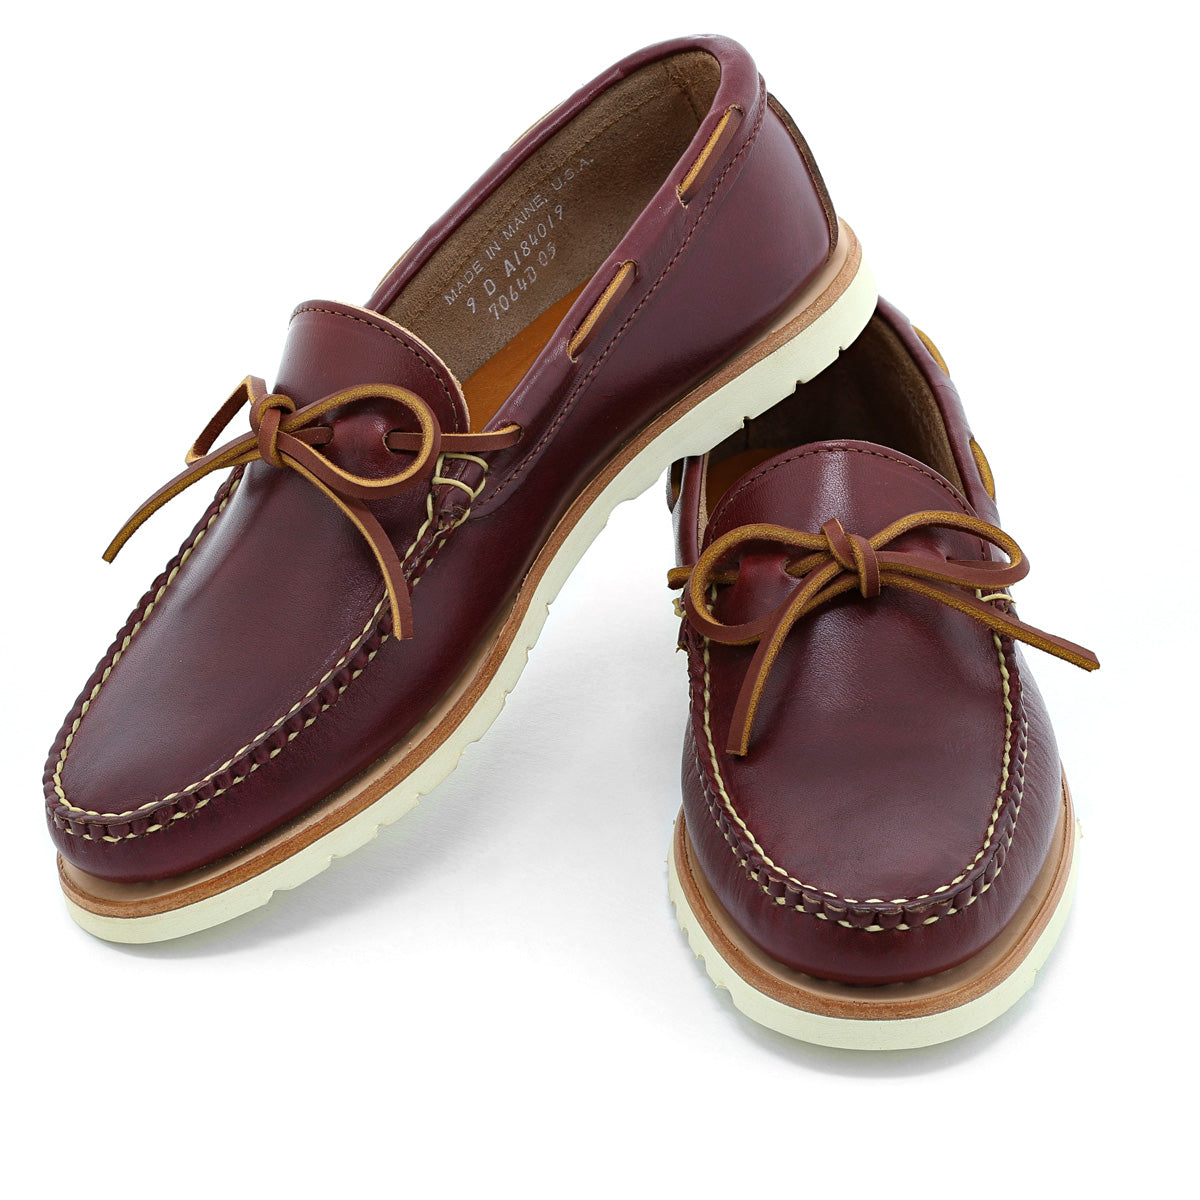 Sale | Men's Leather Shoes and Accessories | Rancourt & Co.